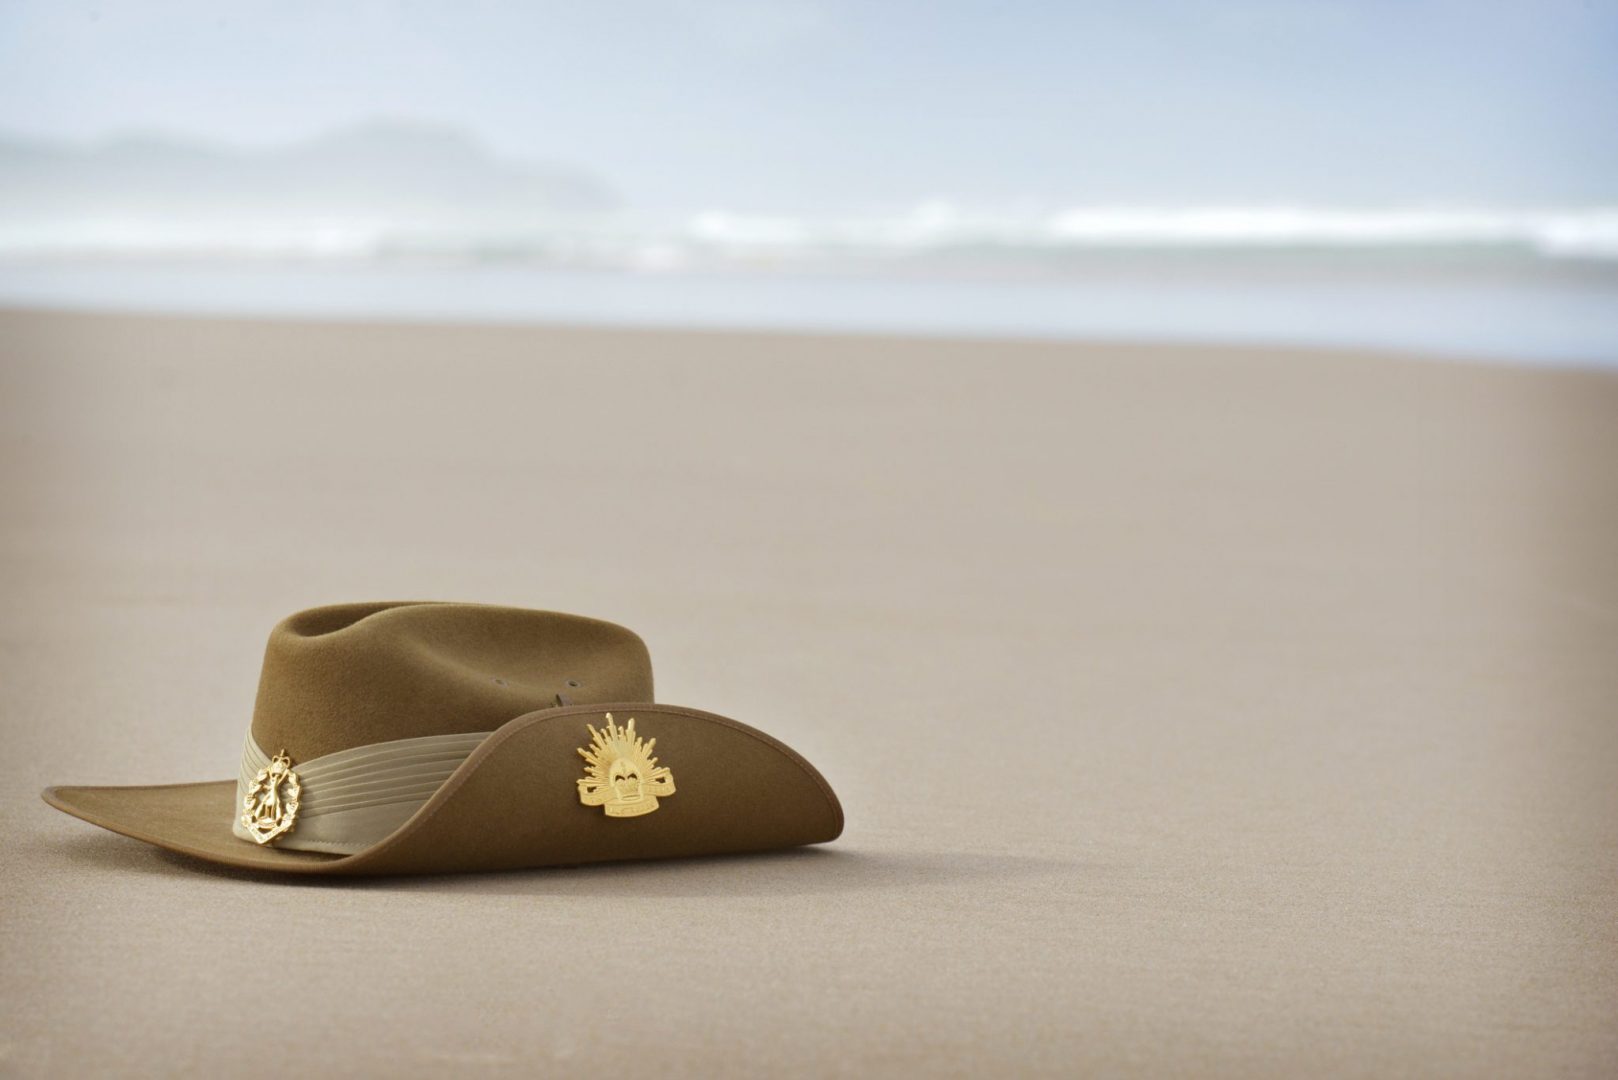 Lest We Forget – Anzac Day 2020